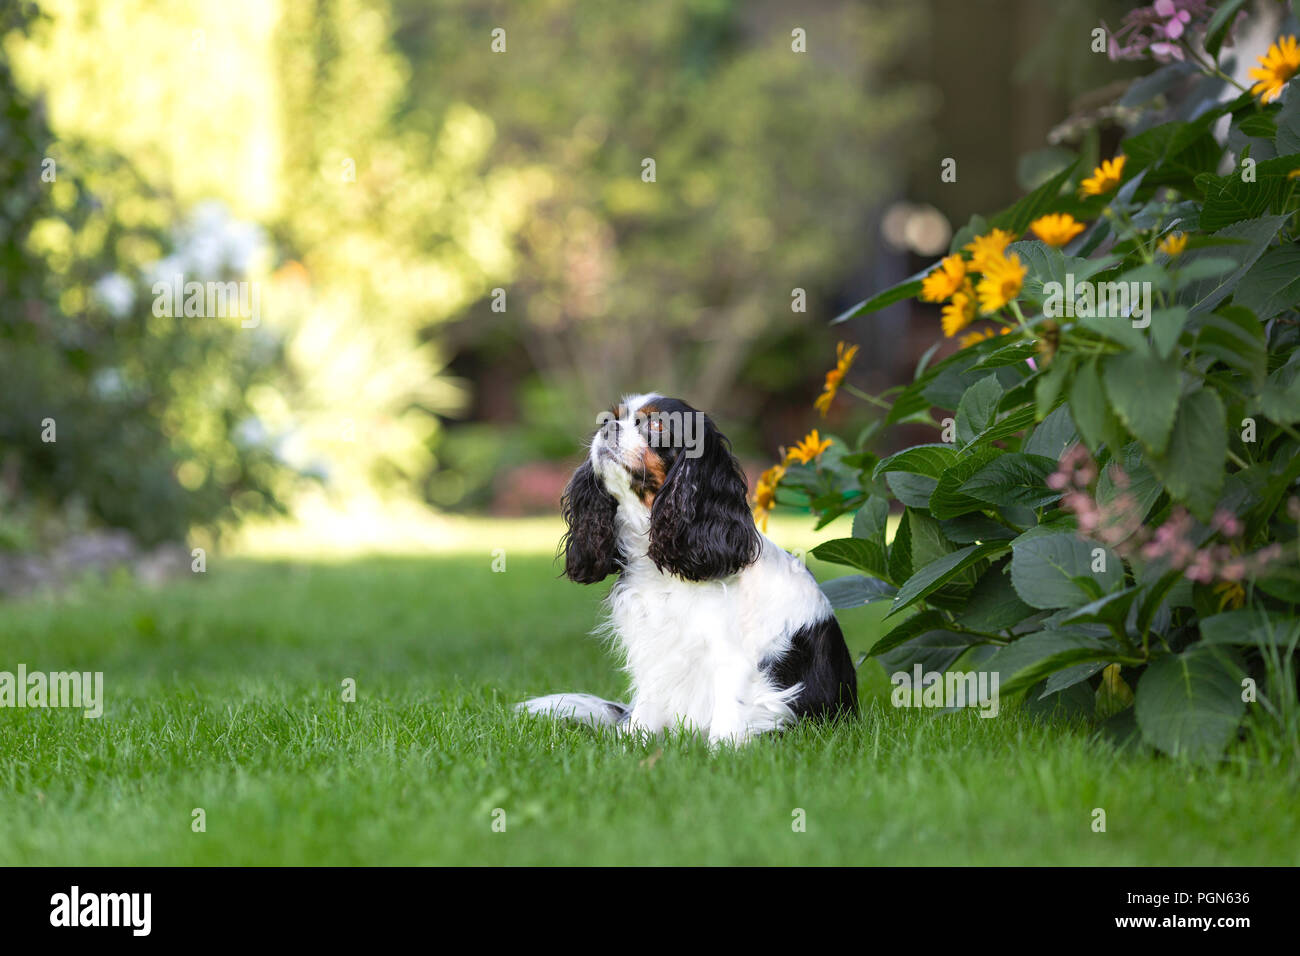 Cute dog sitting on the grass in teh garden and looking up Stock Photo